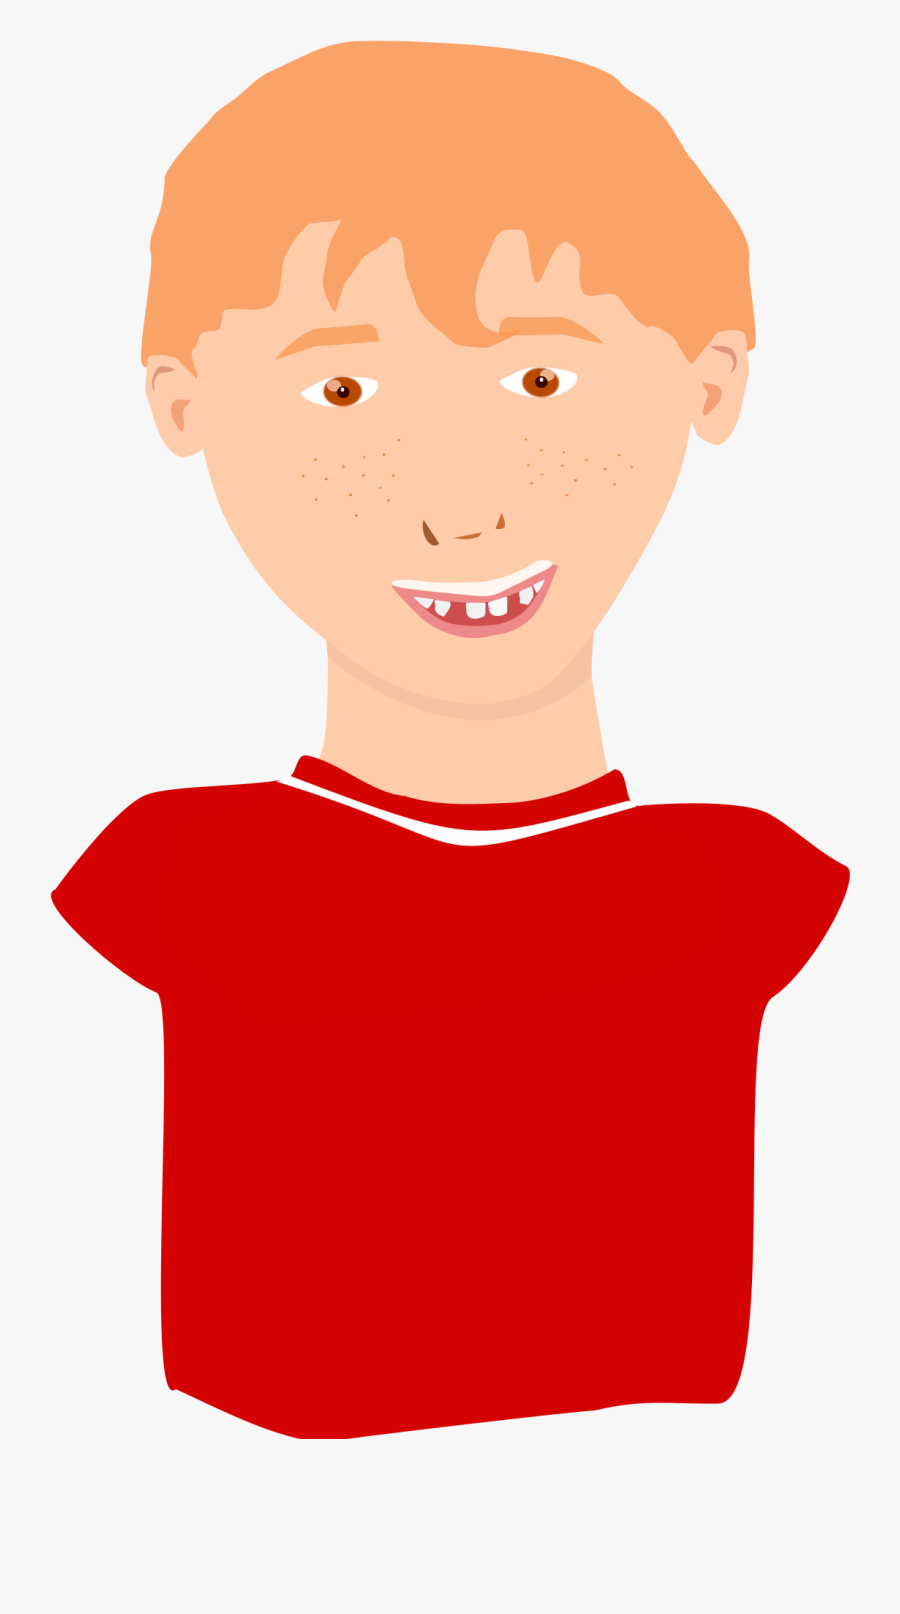 This Free Icons Png Design Of Red-hair Boy Smiling - Ginger Hair Man Clipart, Transparent Clipart